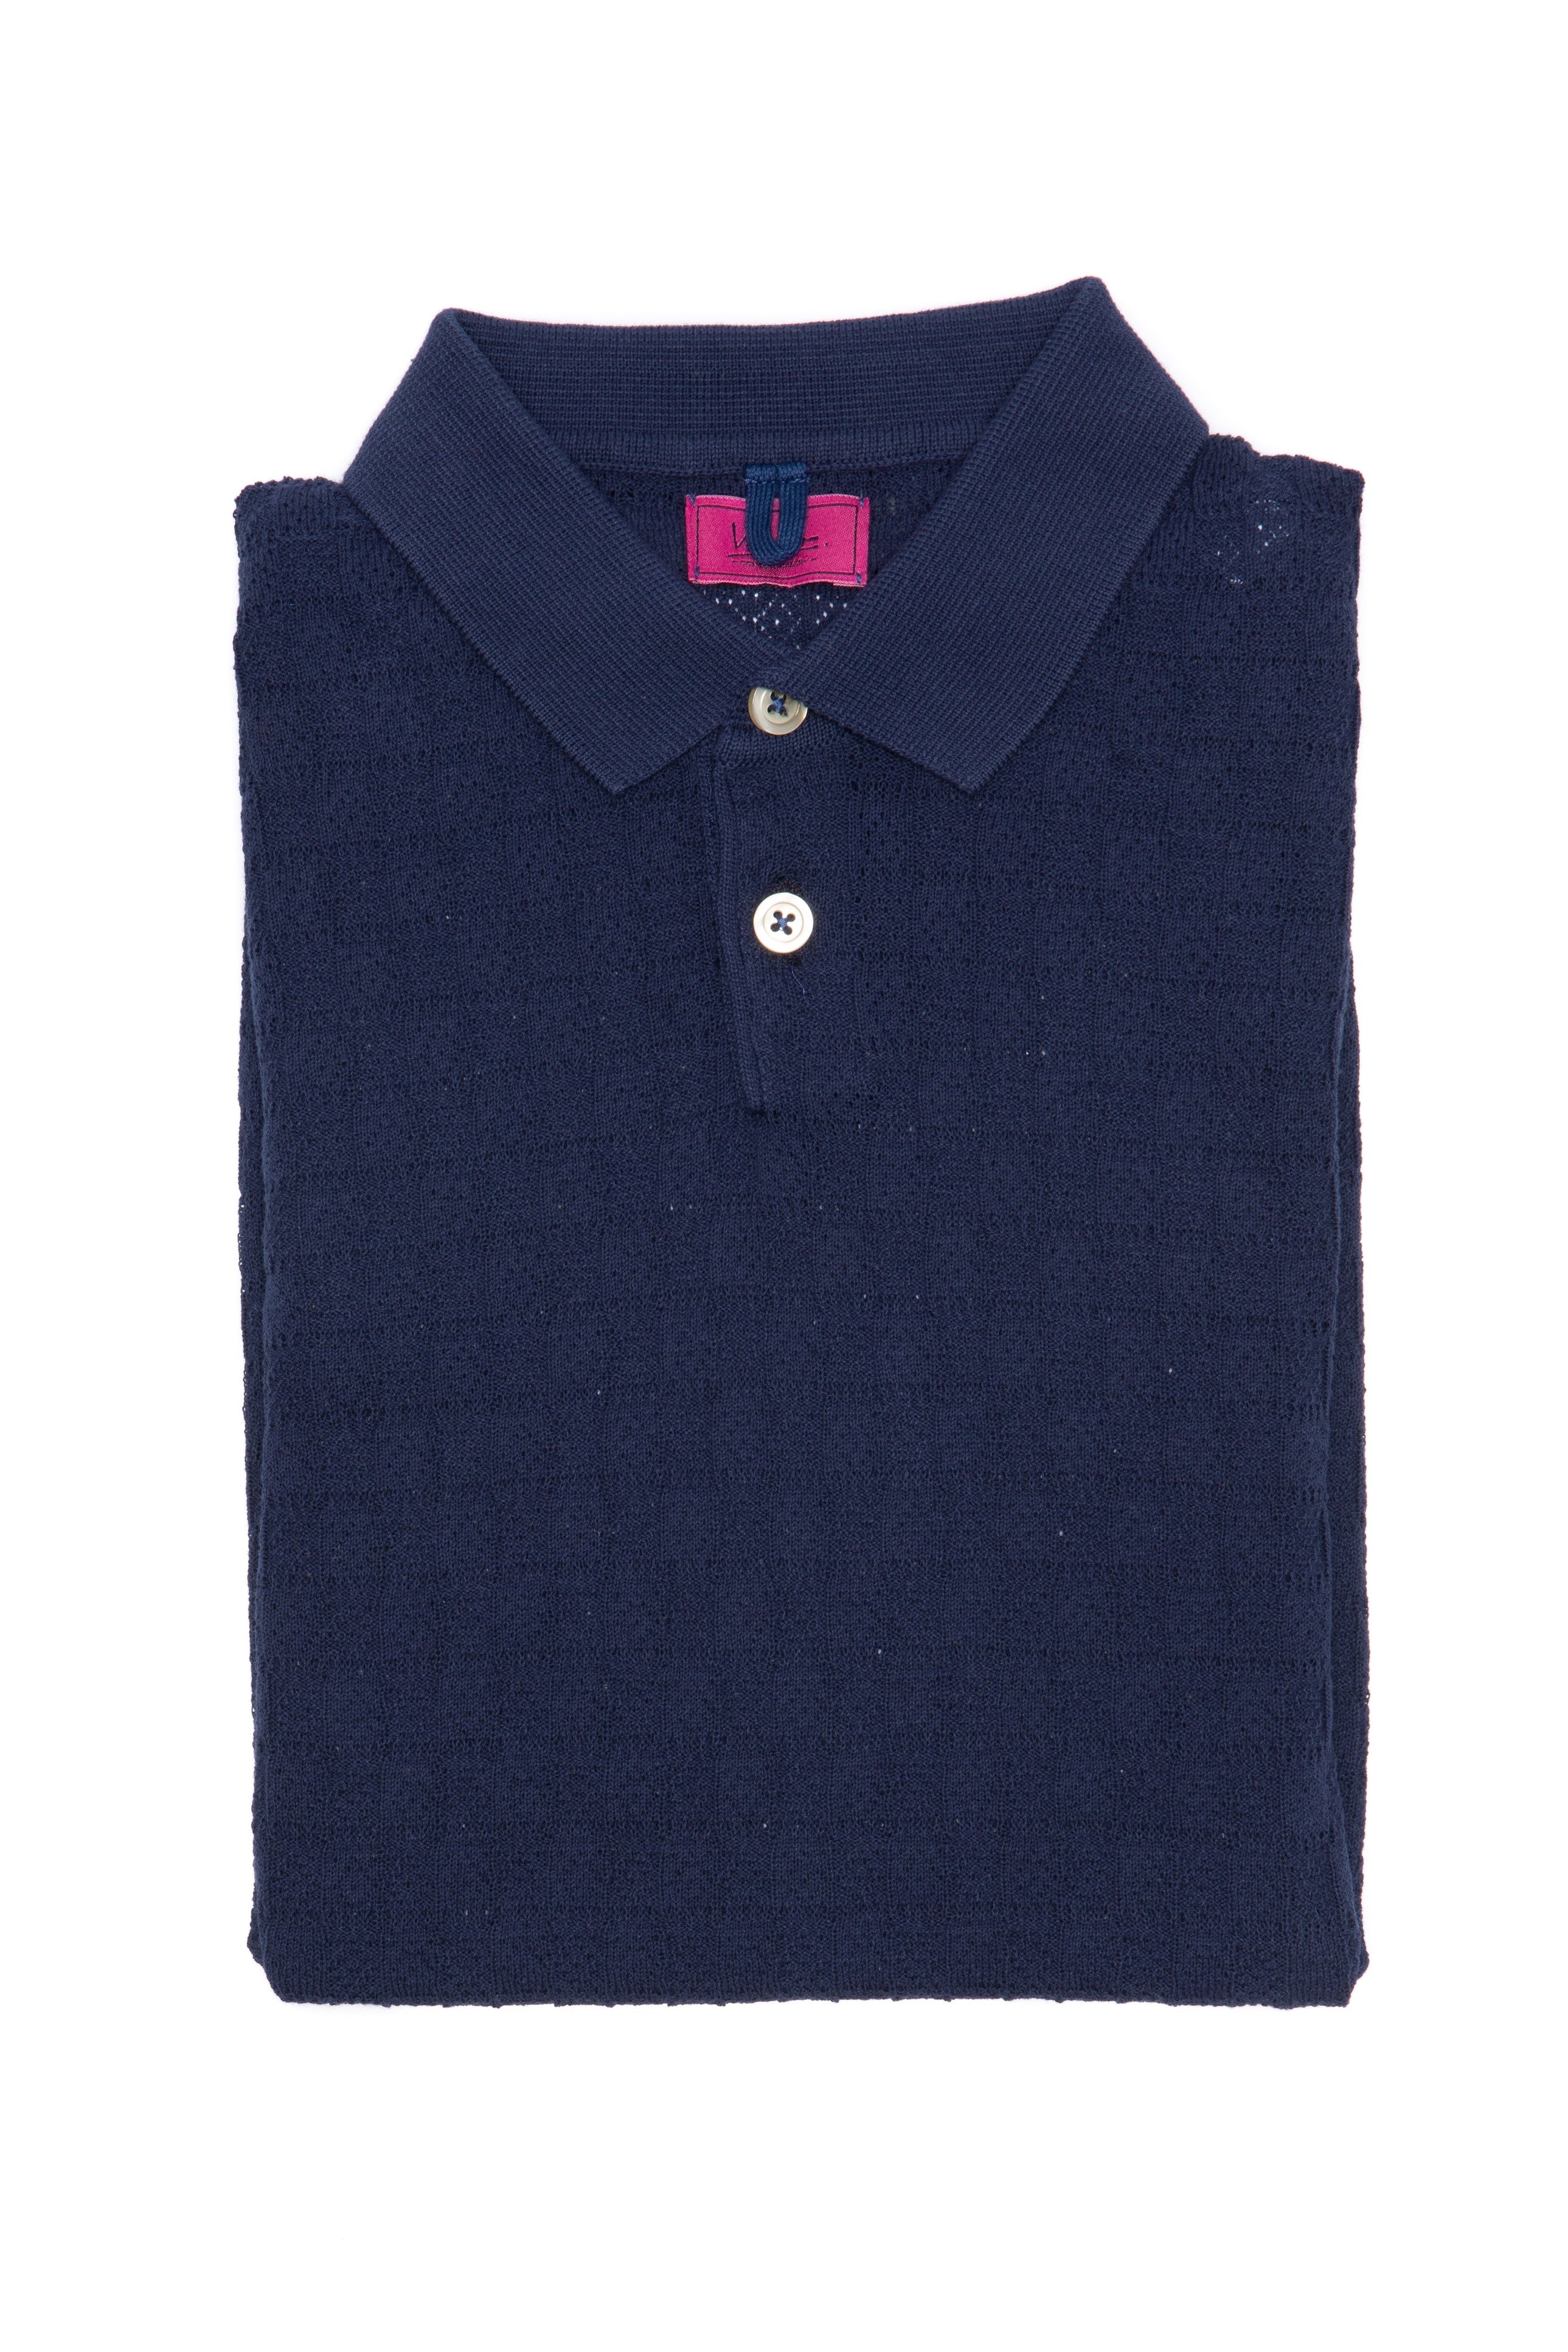 Navy Blue Casual T-Shirt With Polo Collar